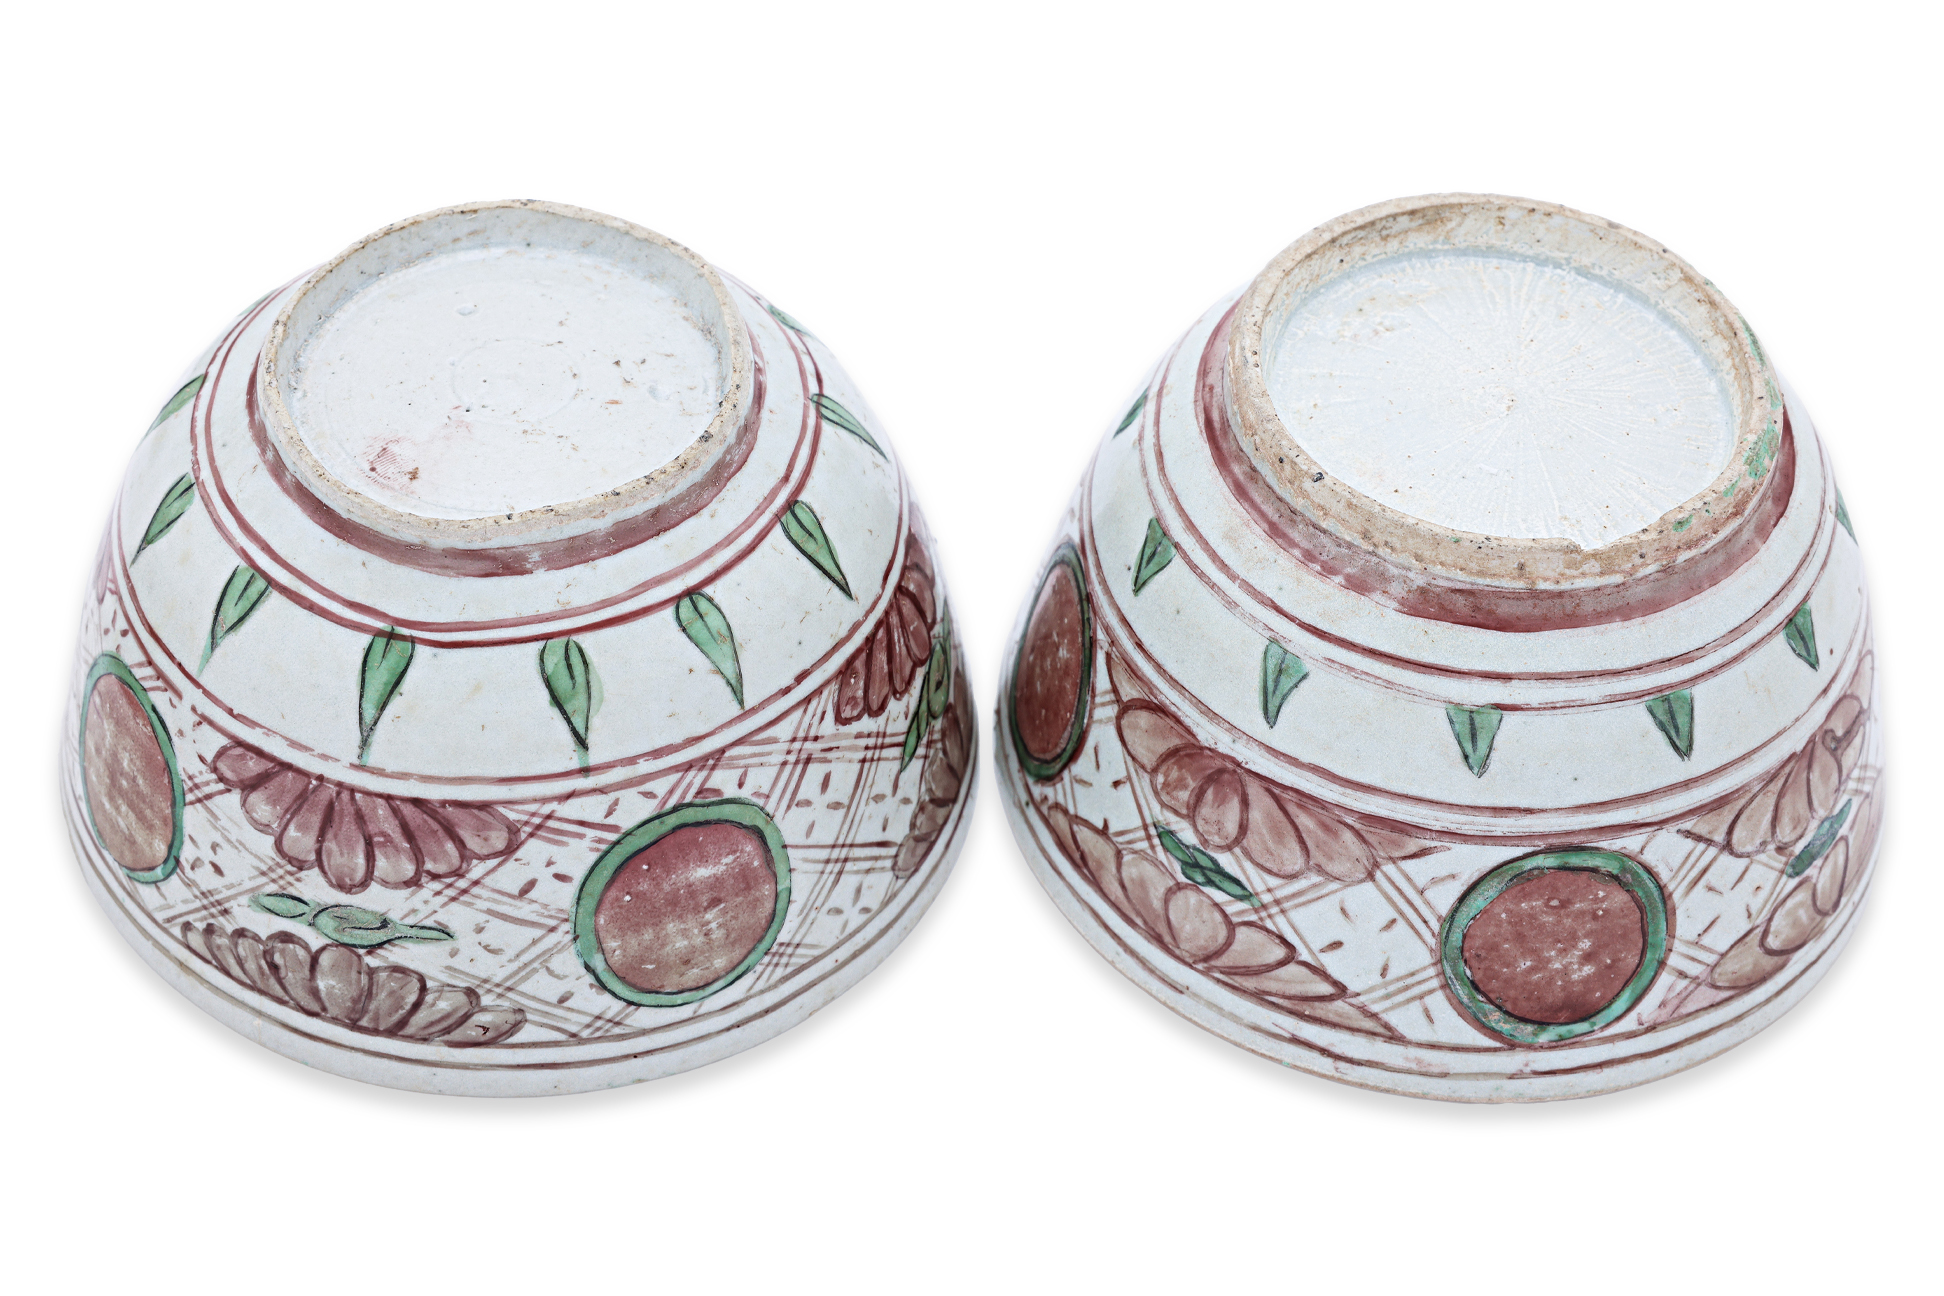 A PAIR OF SWATOW PORCELAIN BOWLS AND COVERS - Image 5 of 5